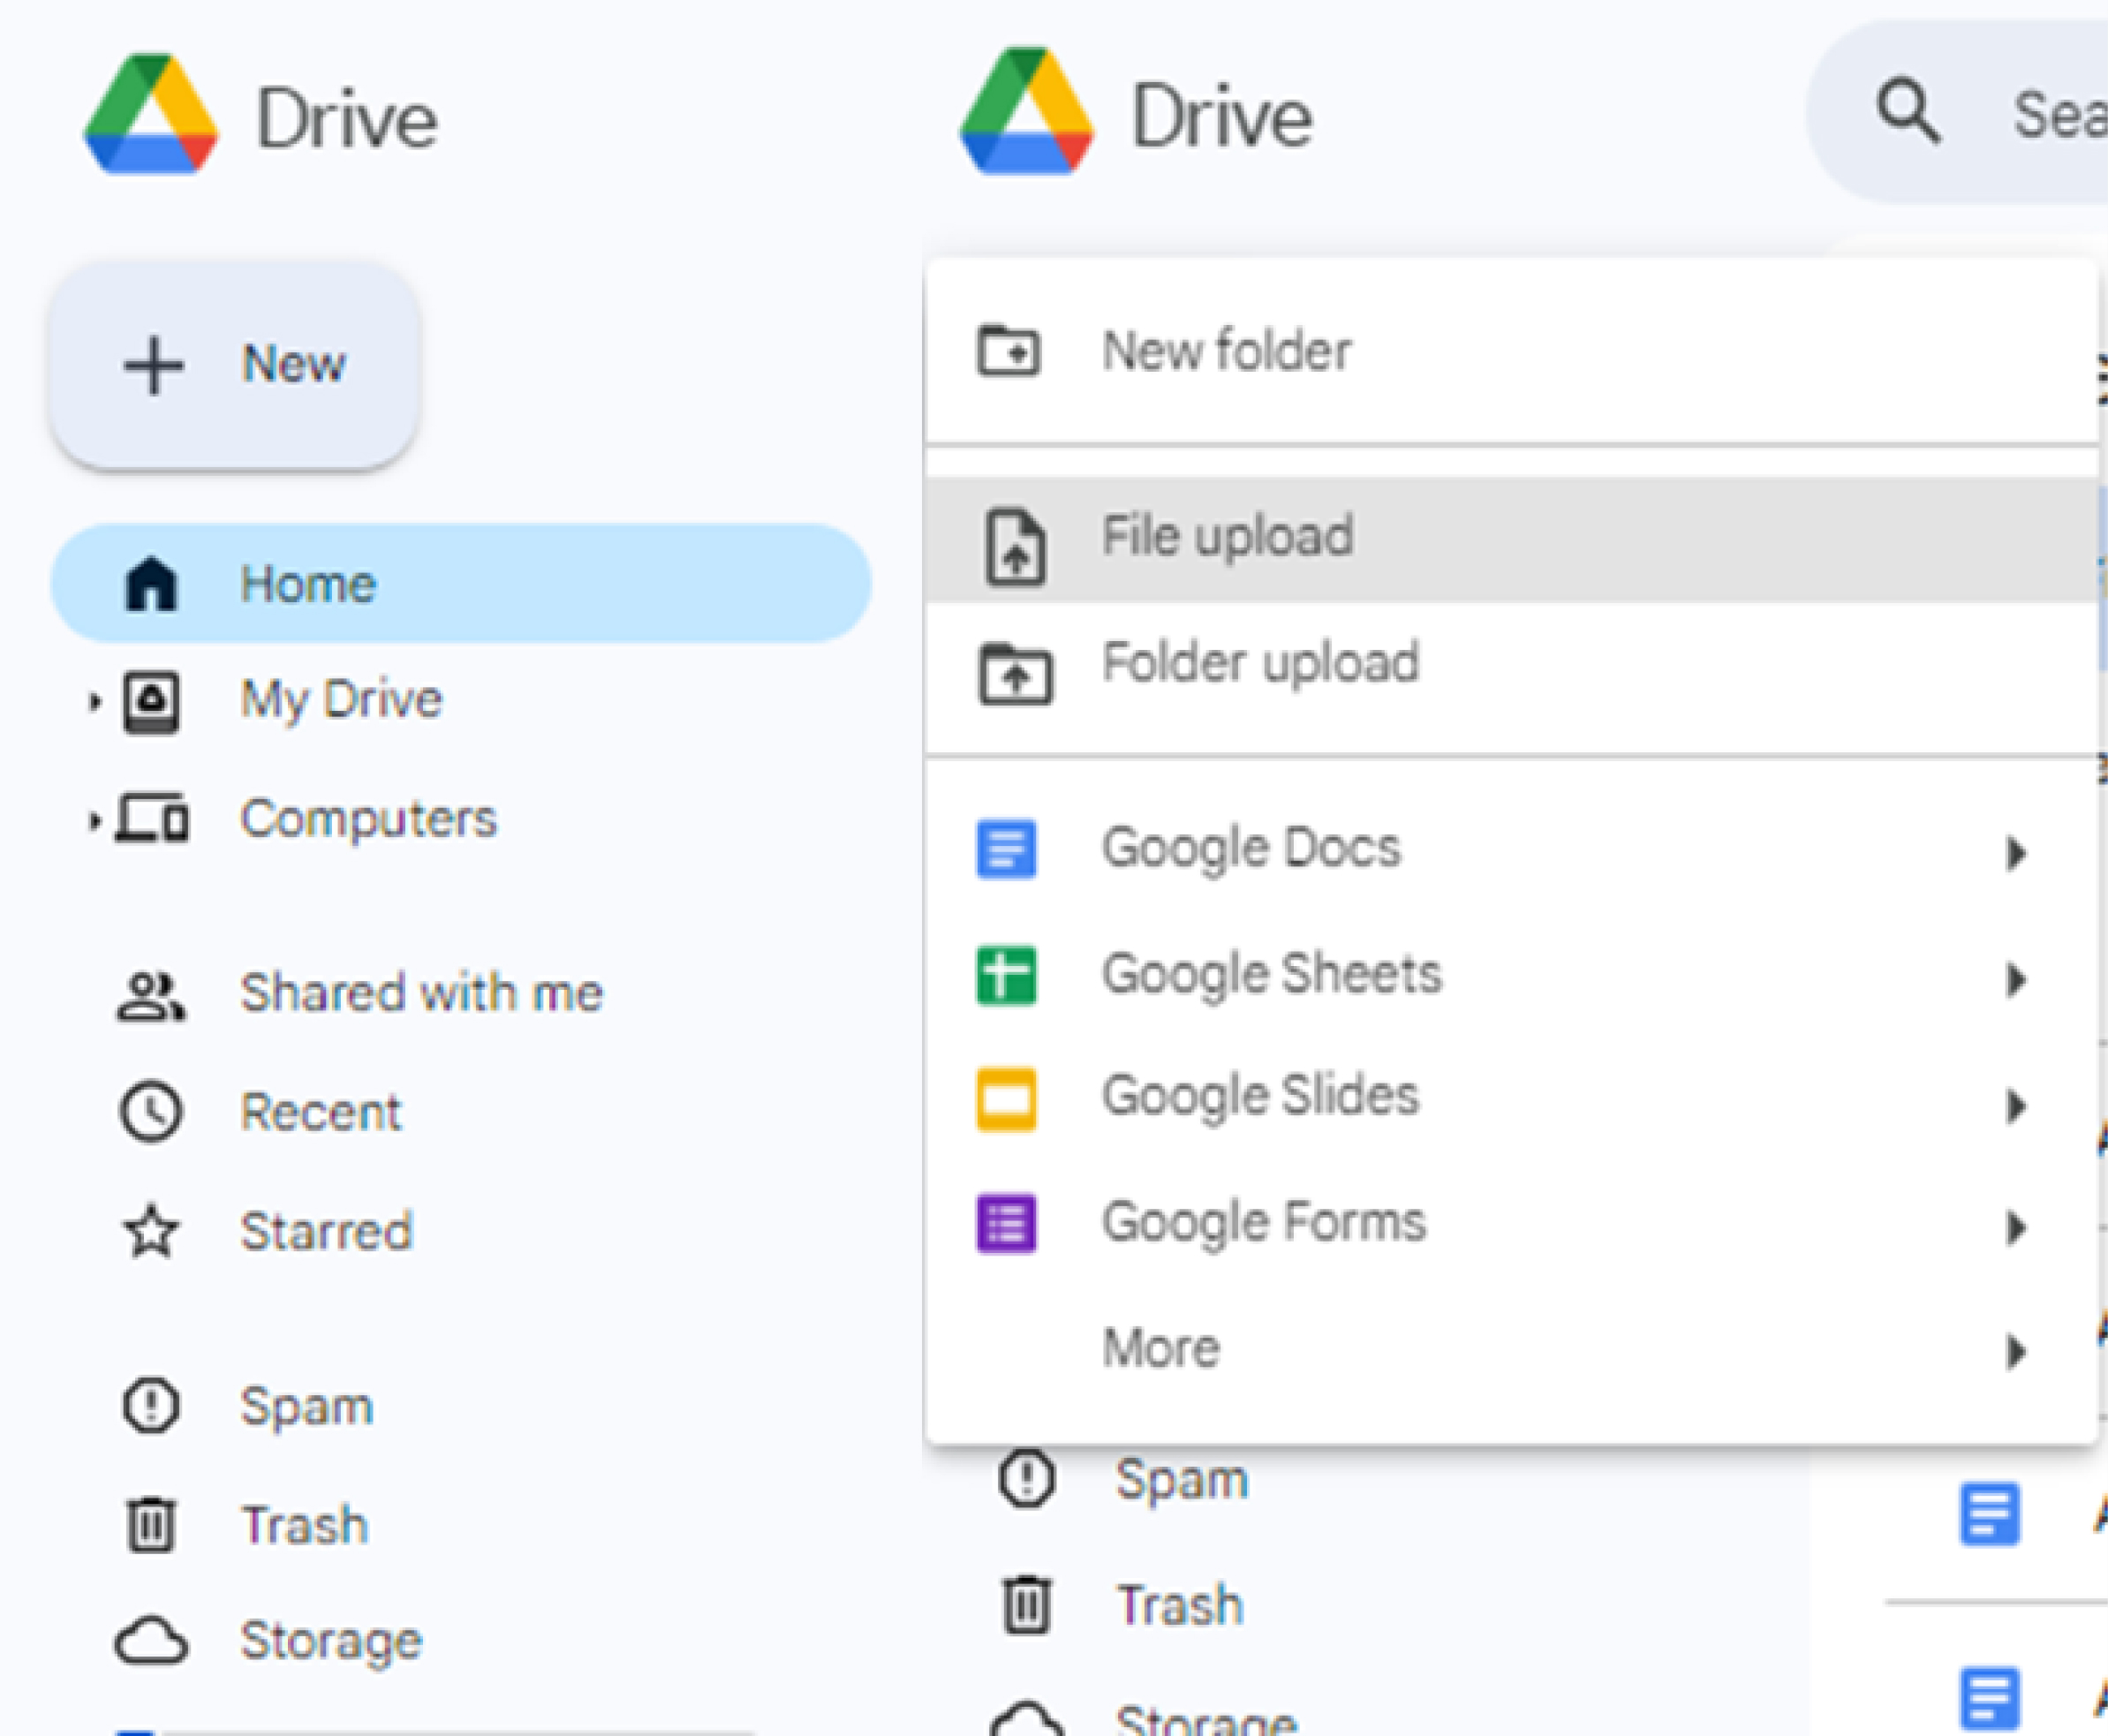 upload files on your google drive on mac then log in and view them on your ipad